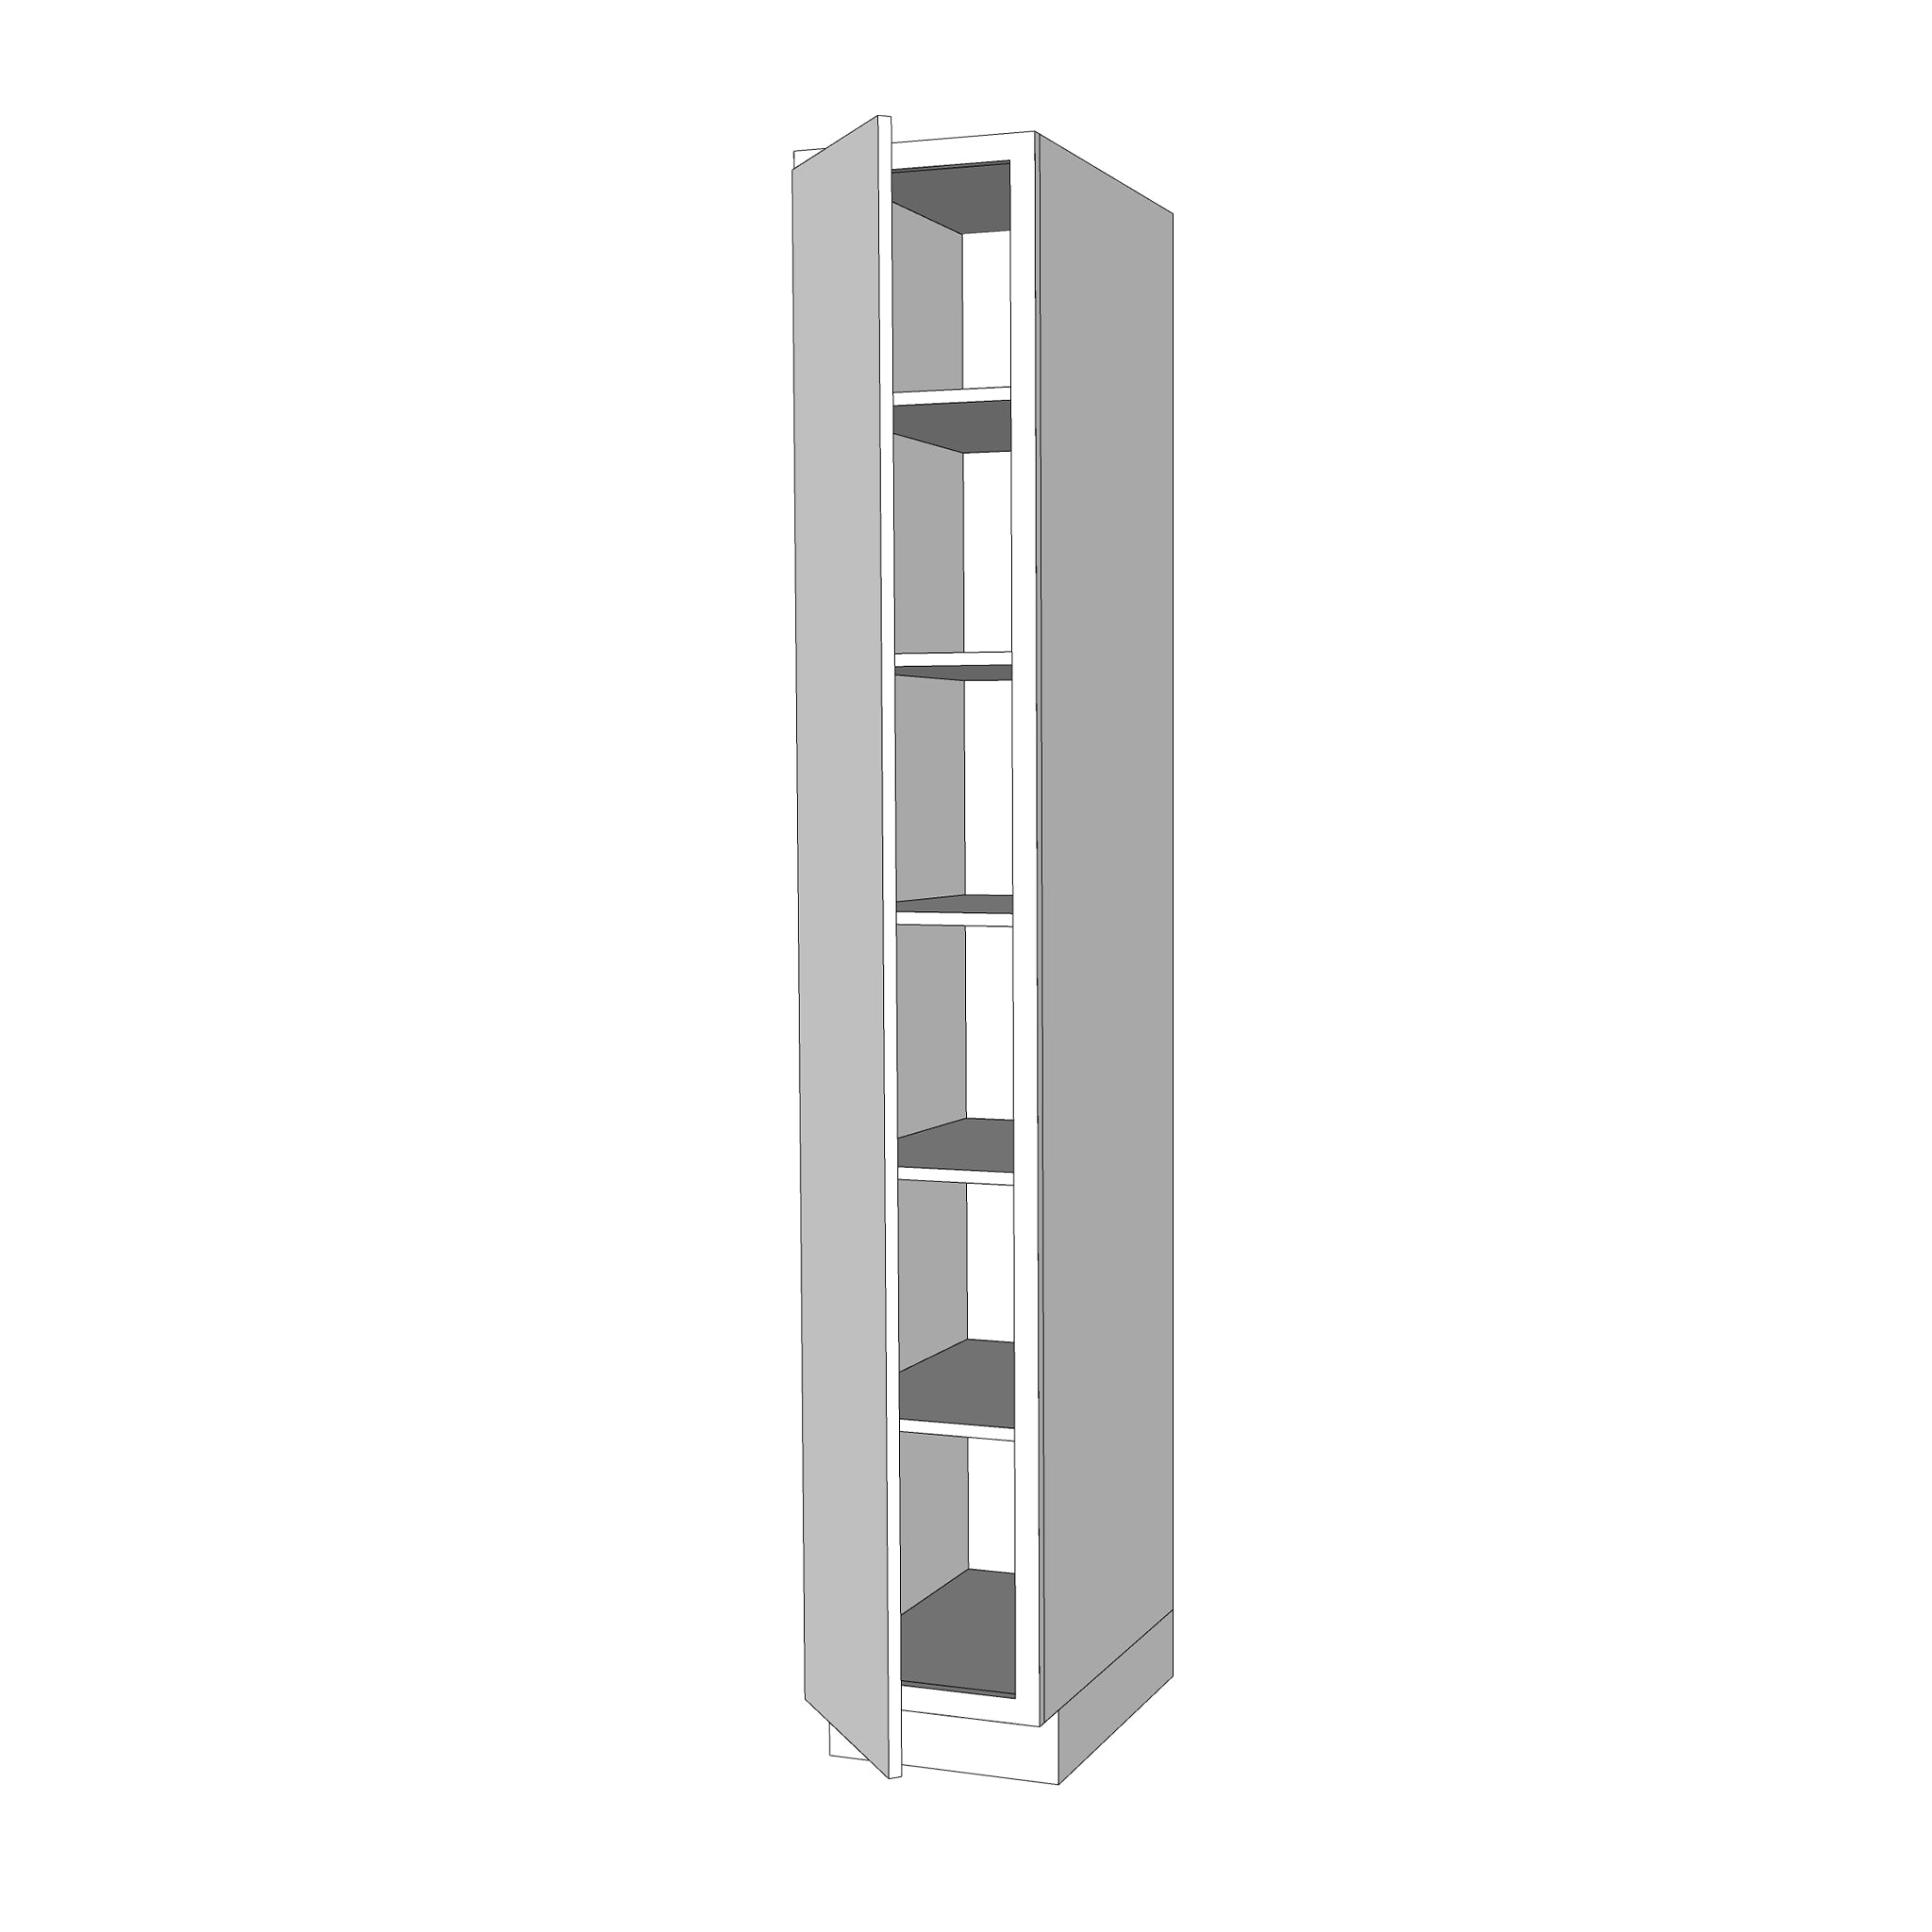 21x95 High Pantry Cabinet - Assembled